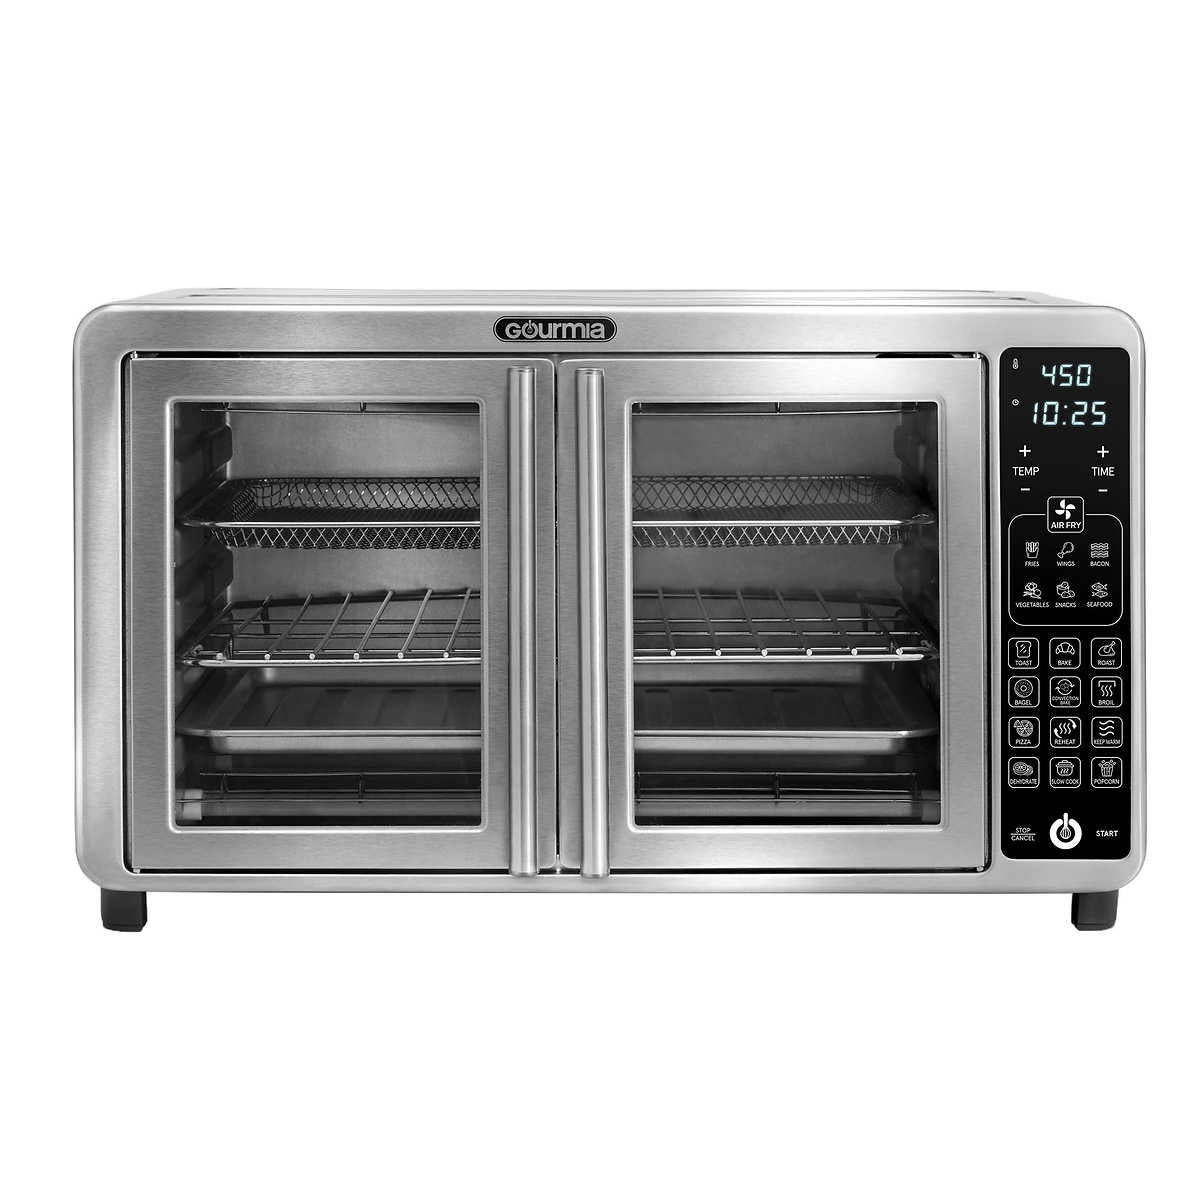 Gourmia XL Digital Air Fryer Toaster Oven with Single-Pull French Doors